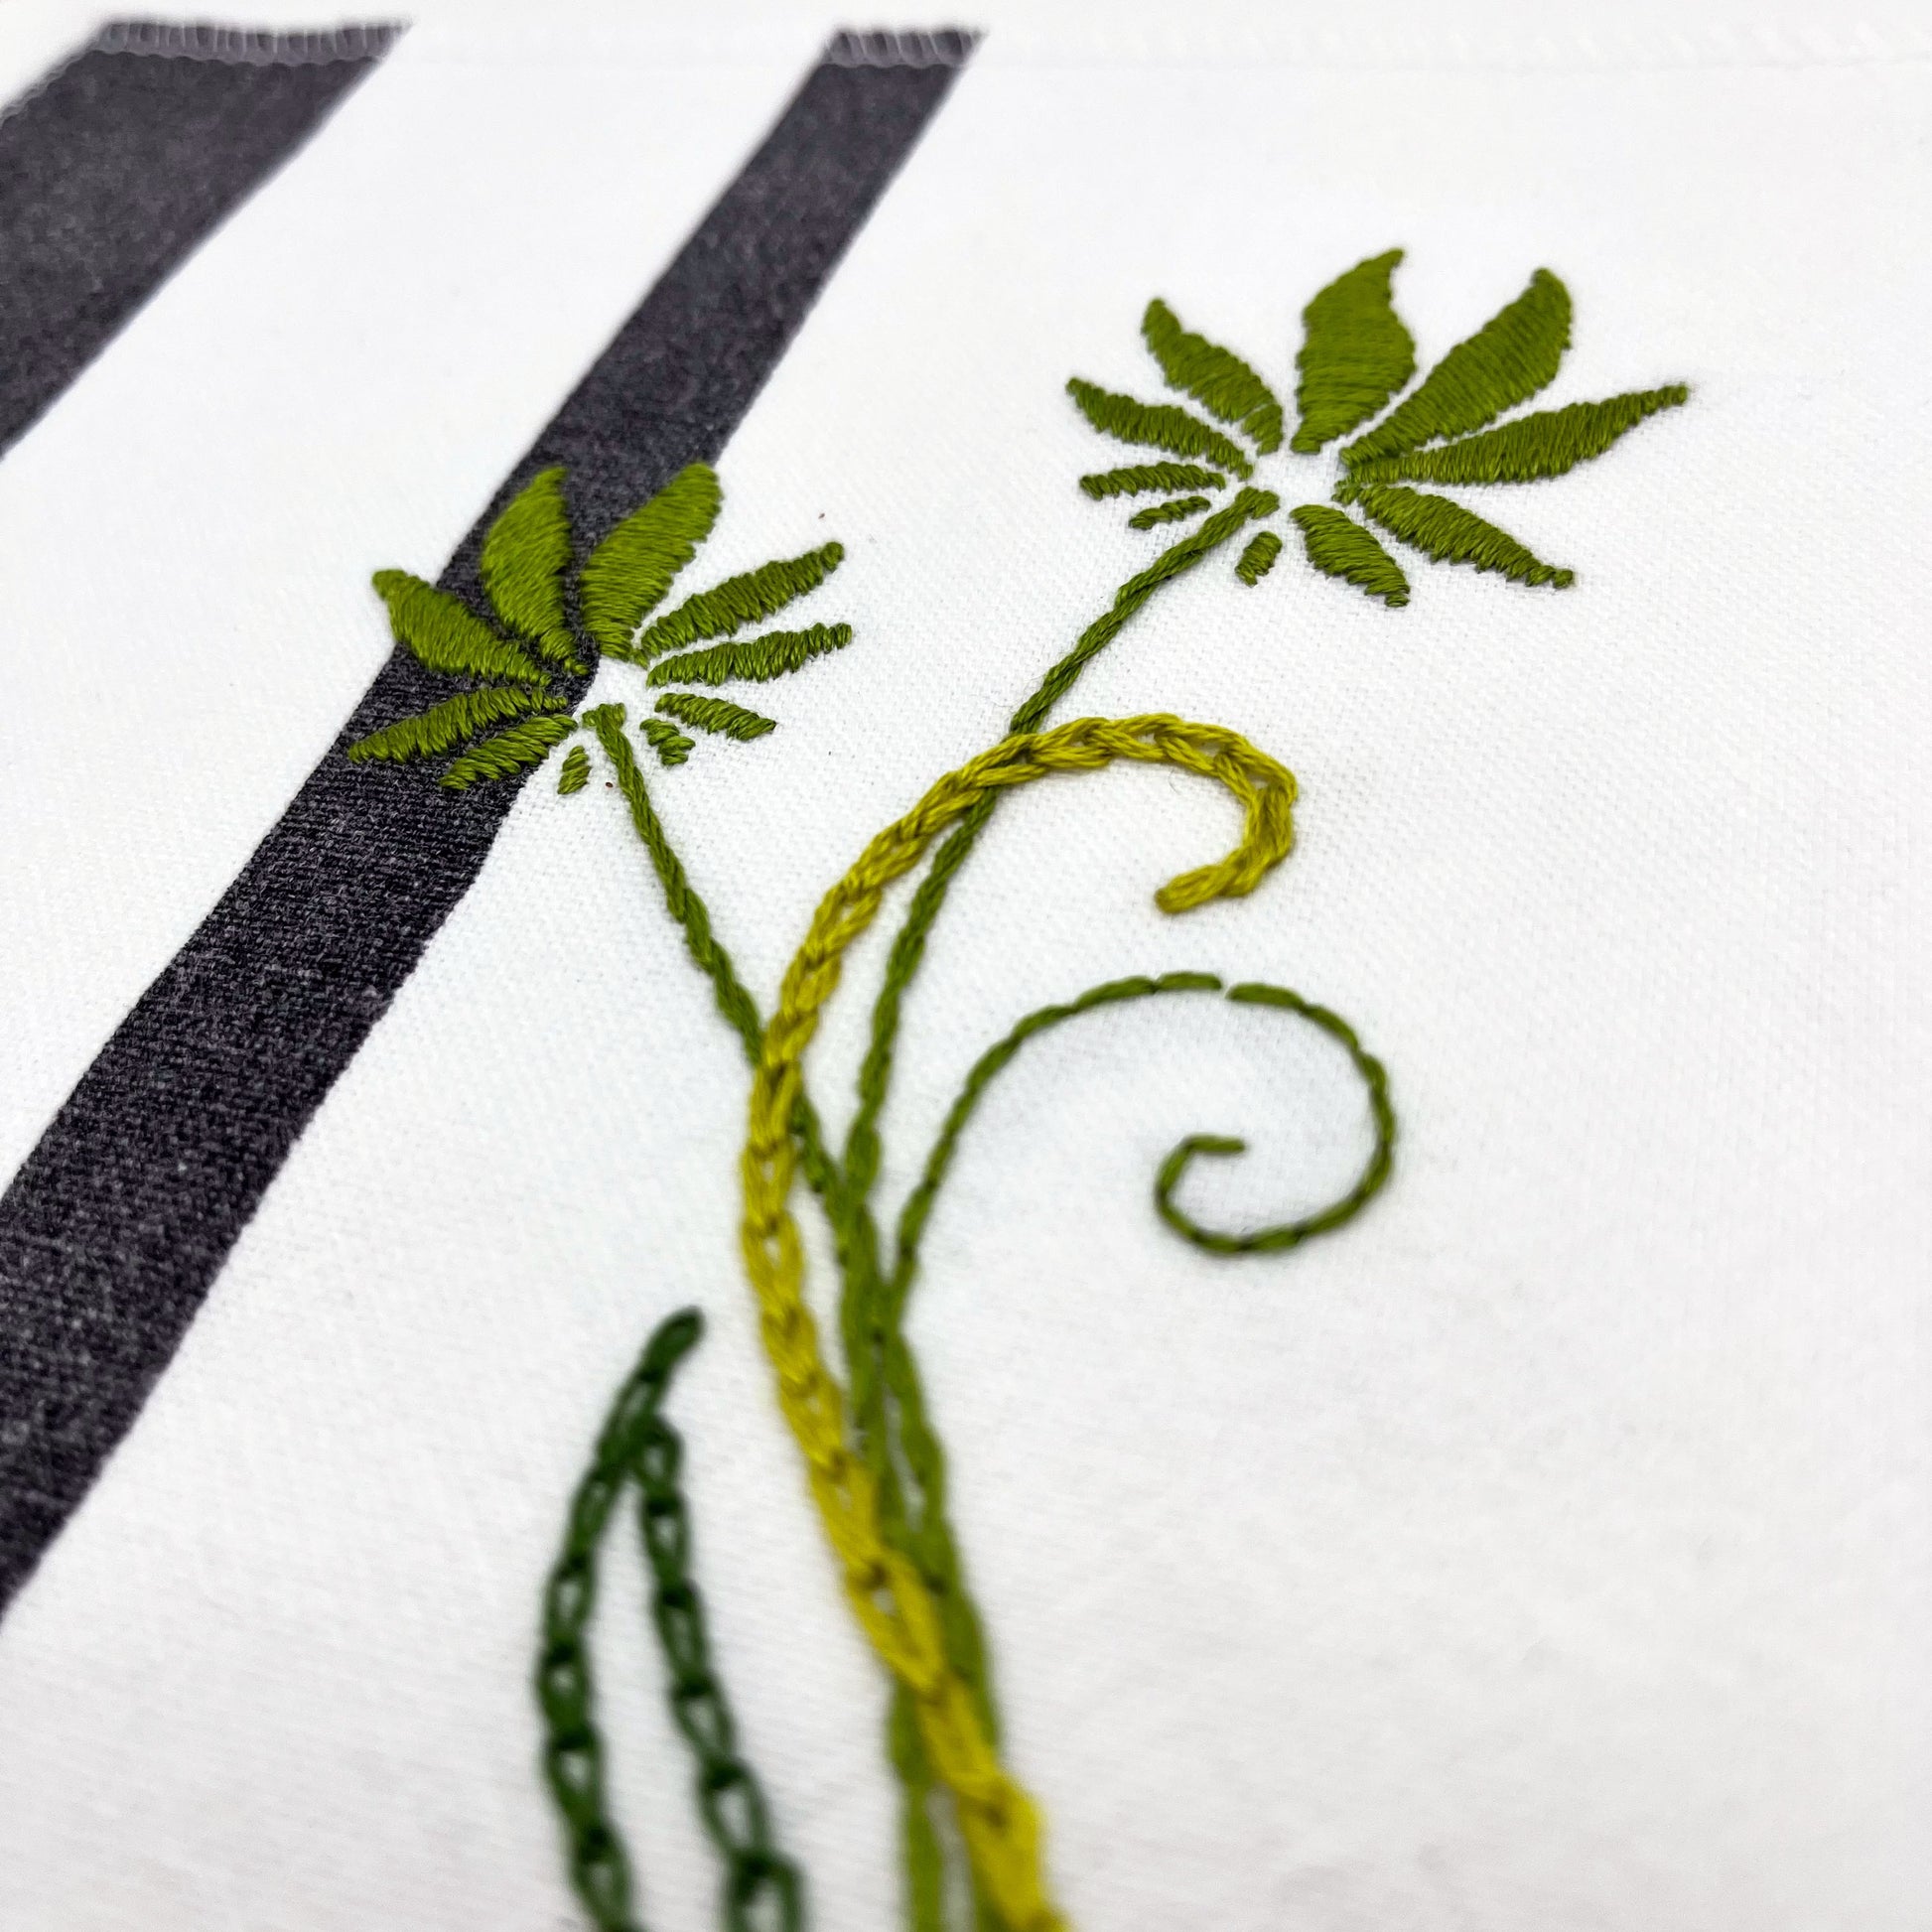 close up angled view of a fabric wall hanging made out of white fabric with black vertical stripes, hand stitched with flowers in shades of green with long curvy stems in chainstitch, backstitch and stem stitch, on a white background